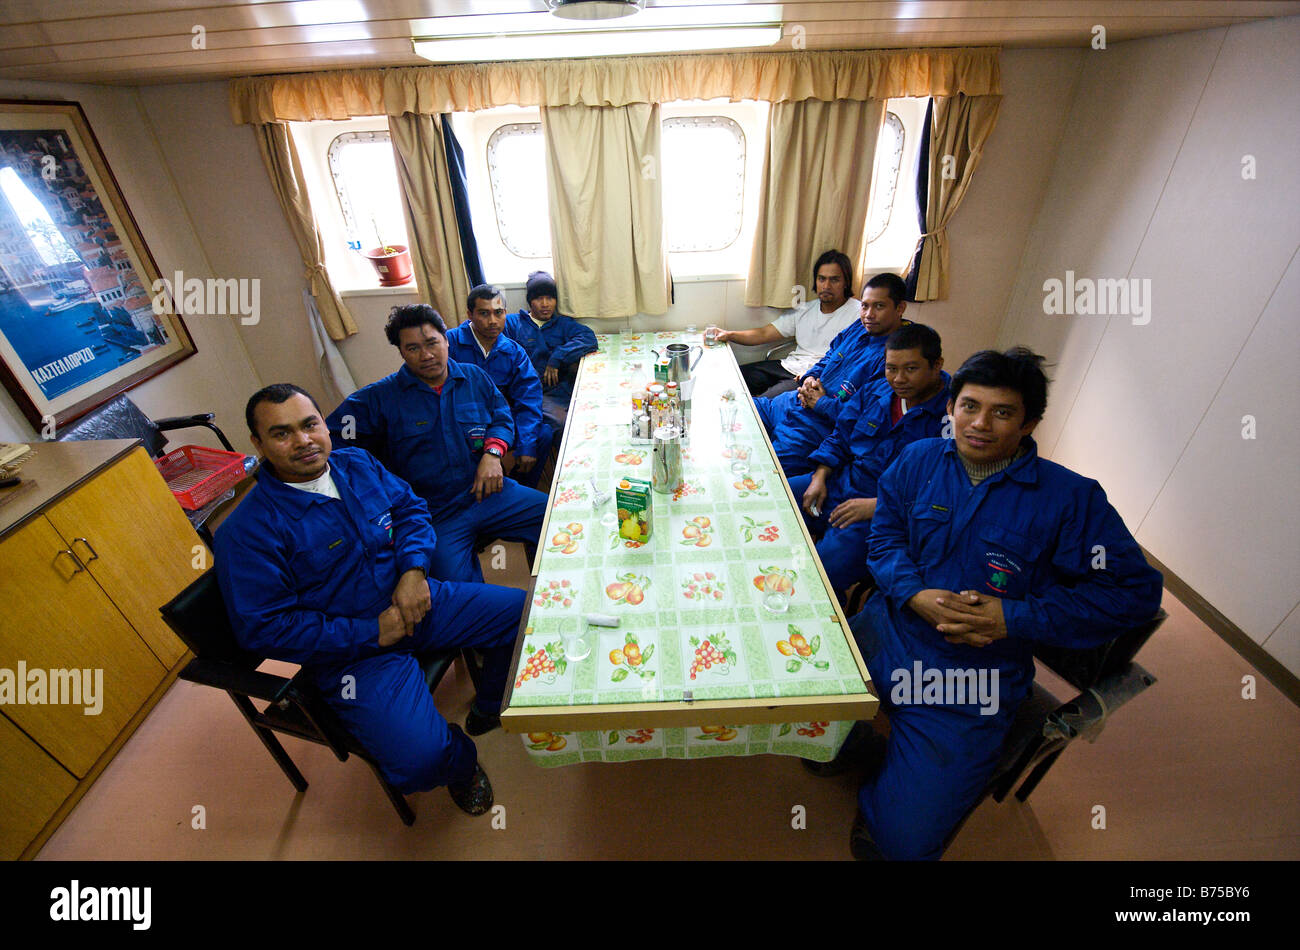 Crew of bulk carrier in the messroom waiting for food being served Stock Photo